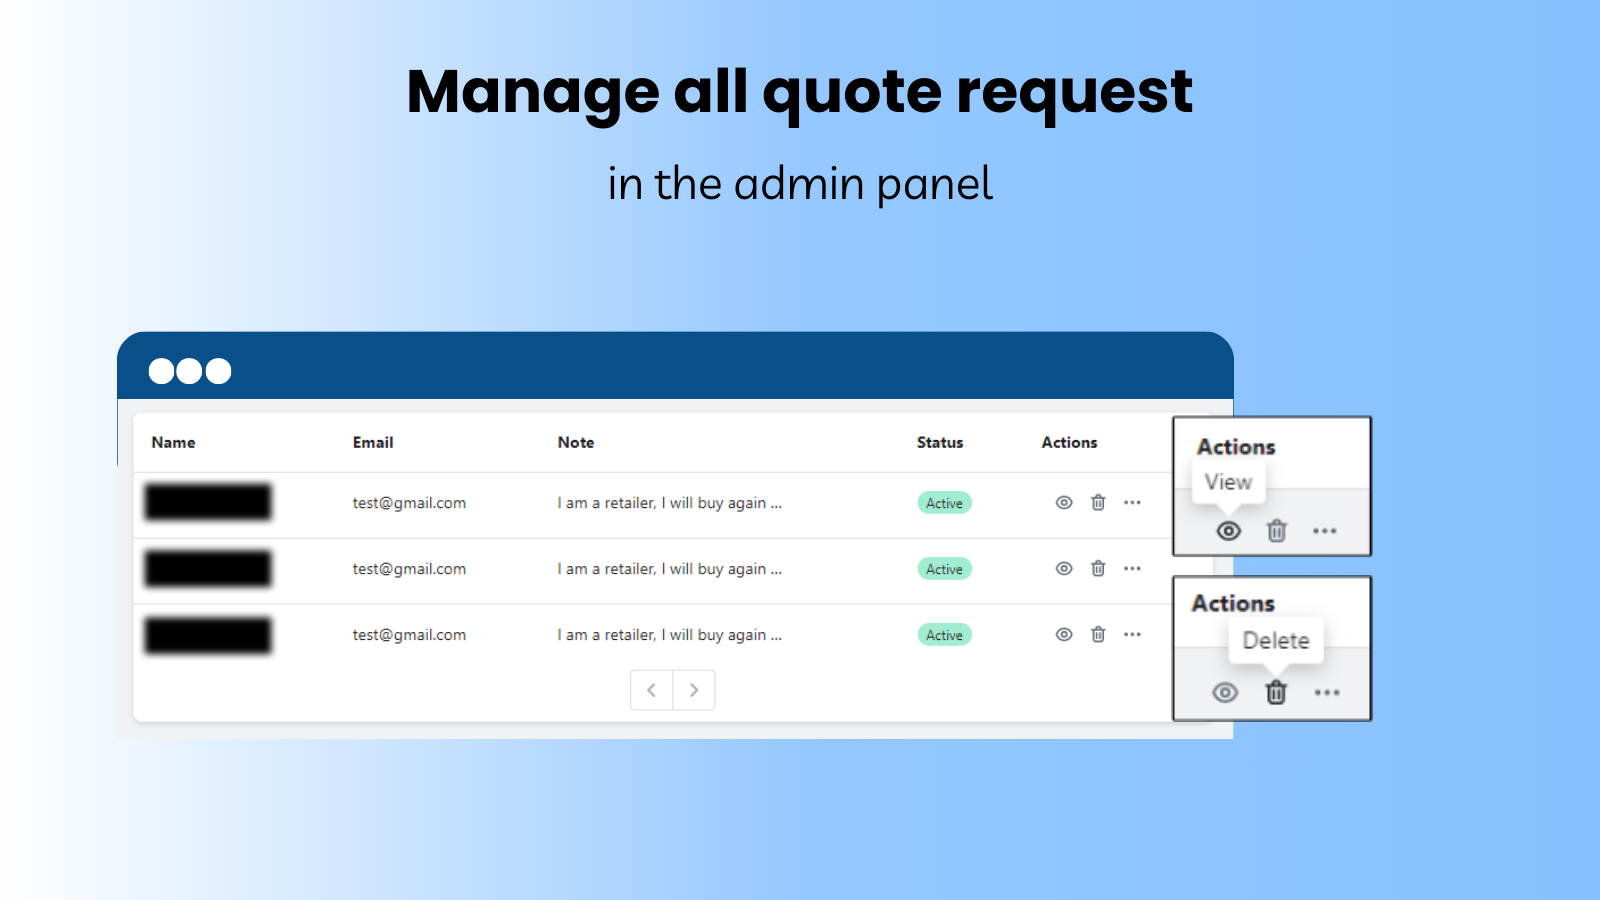 Manage all quote requests in the admin panel